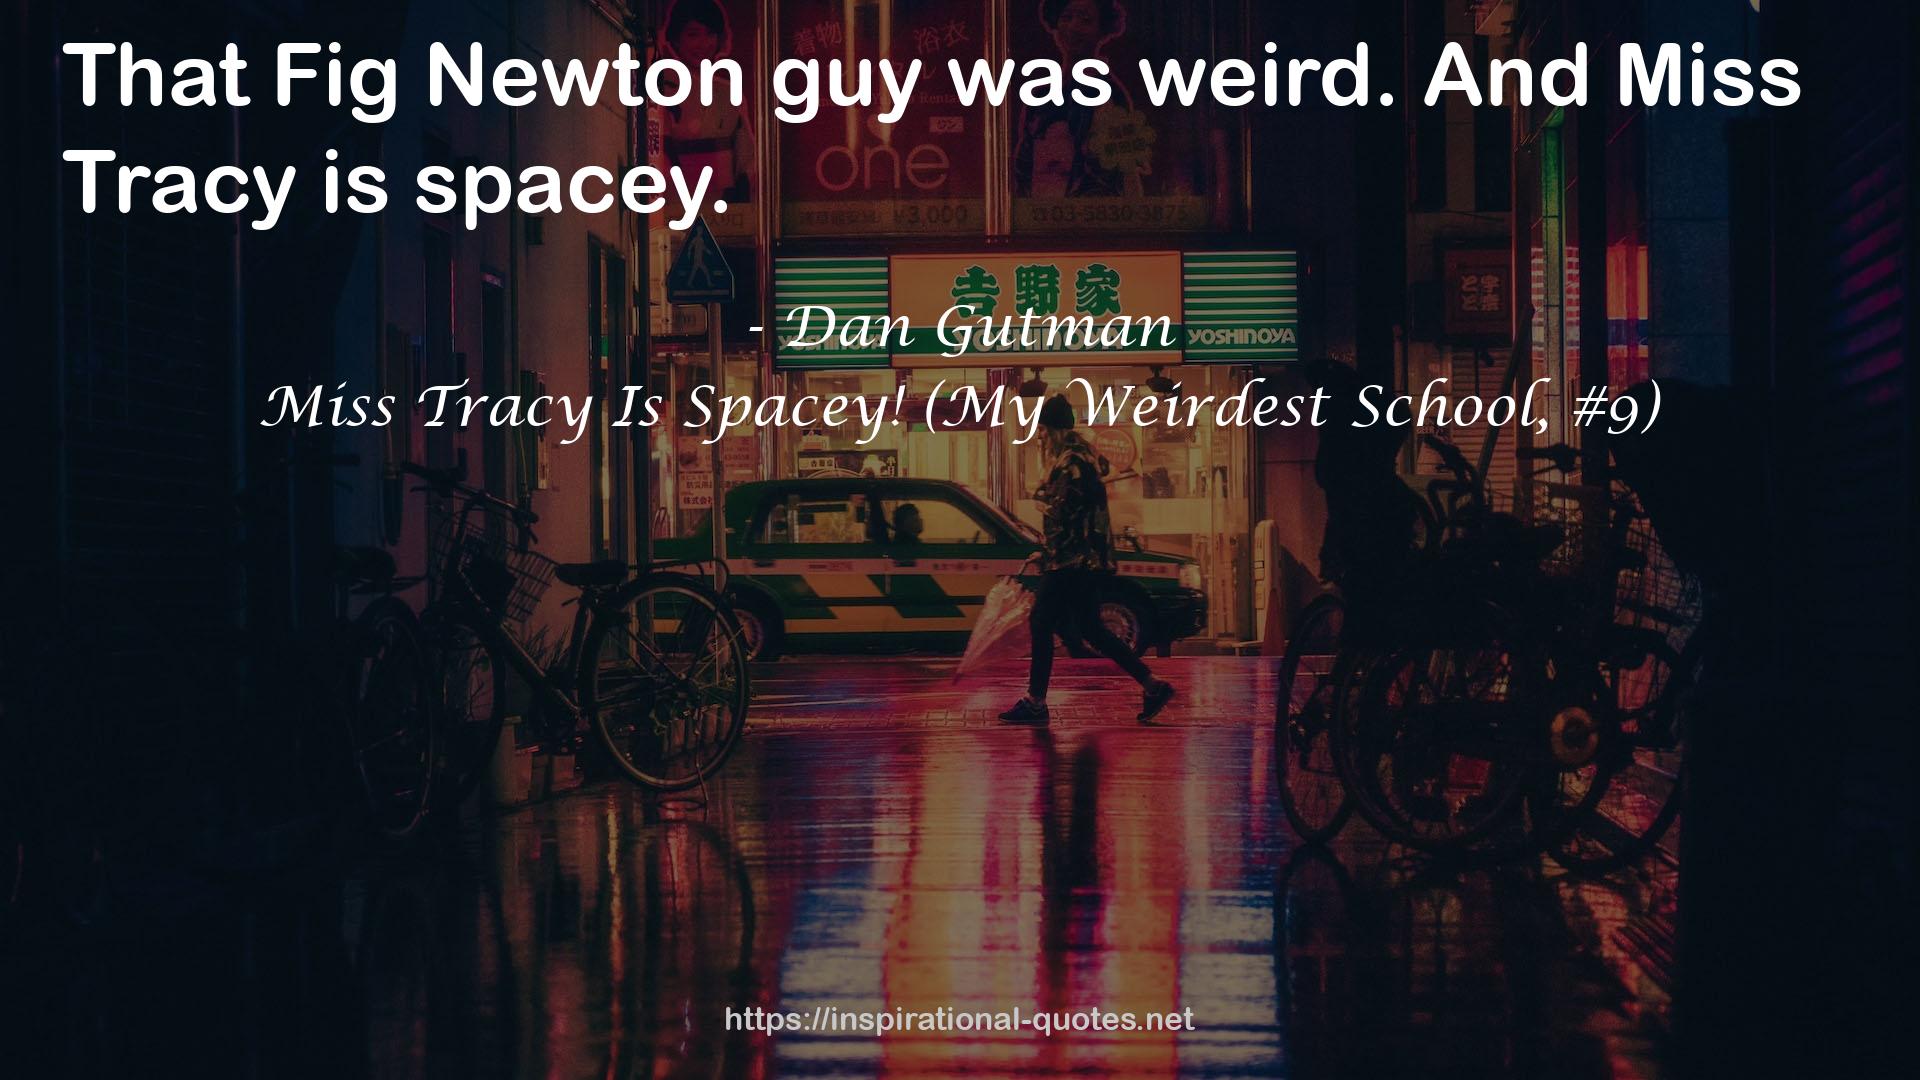 Miss Tracy Is Spacey! (My Weirdest School, #9) QUOTES